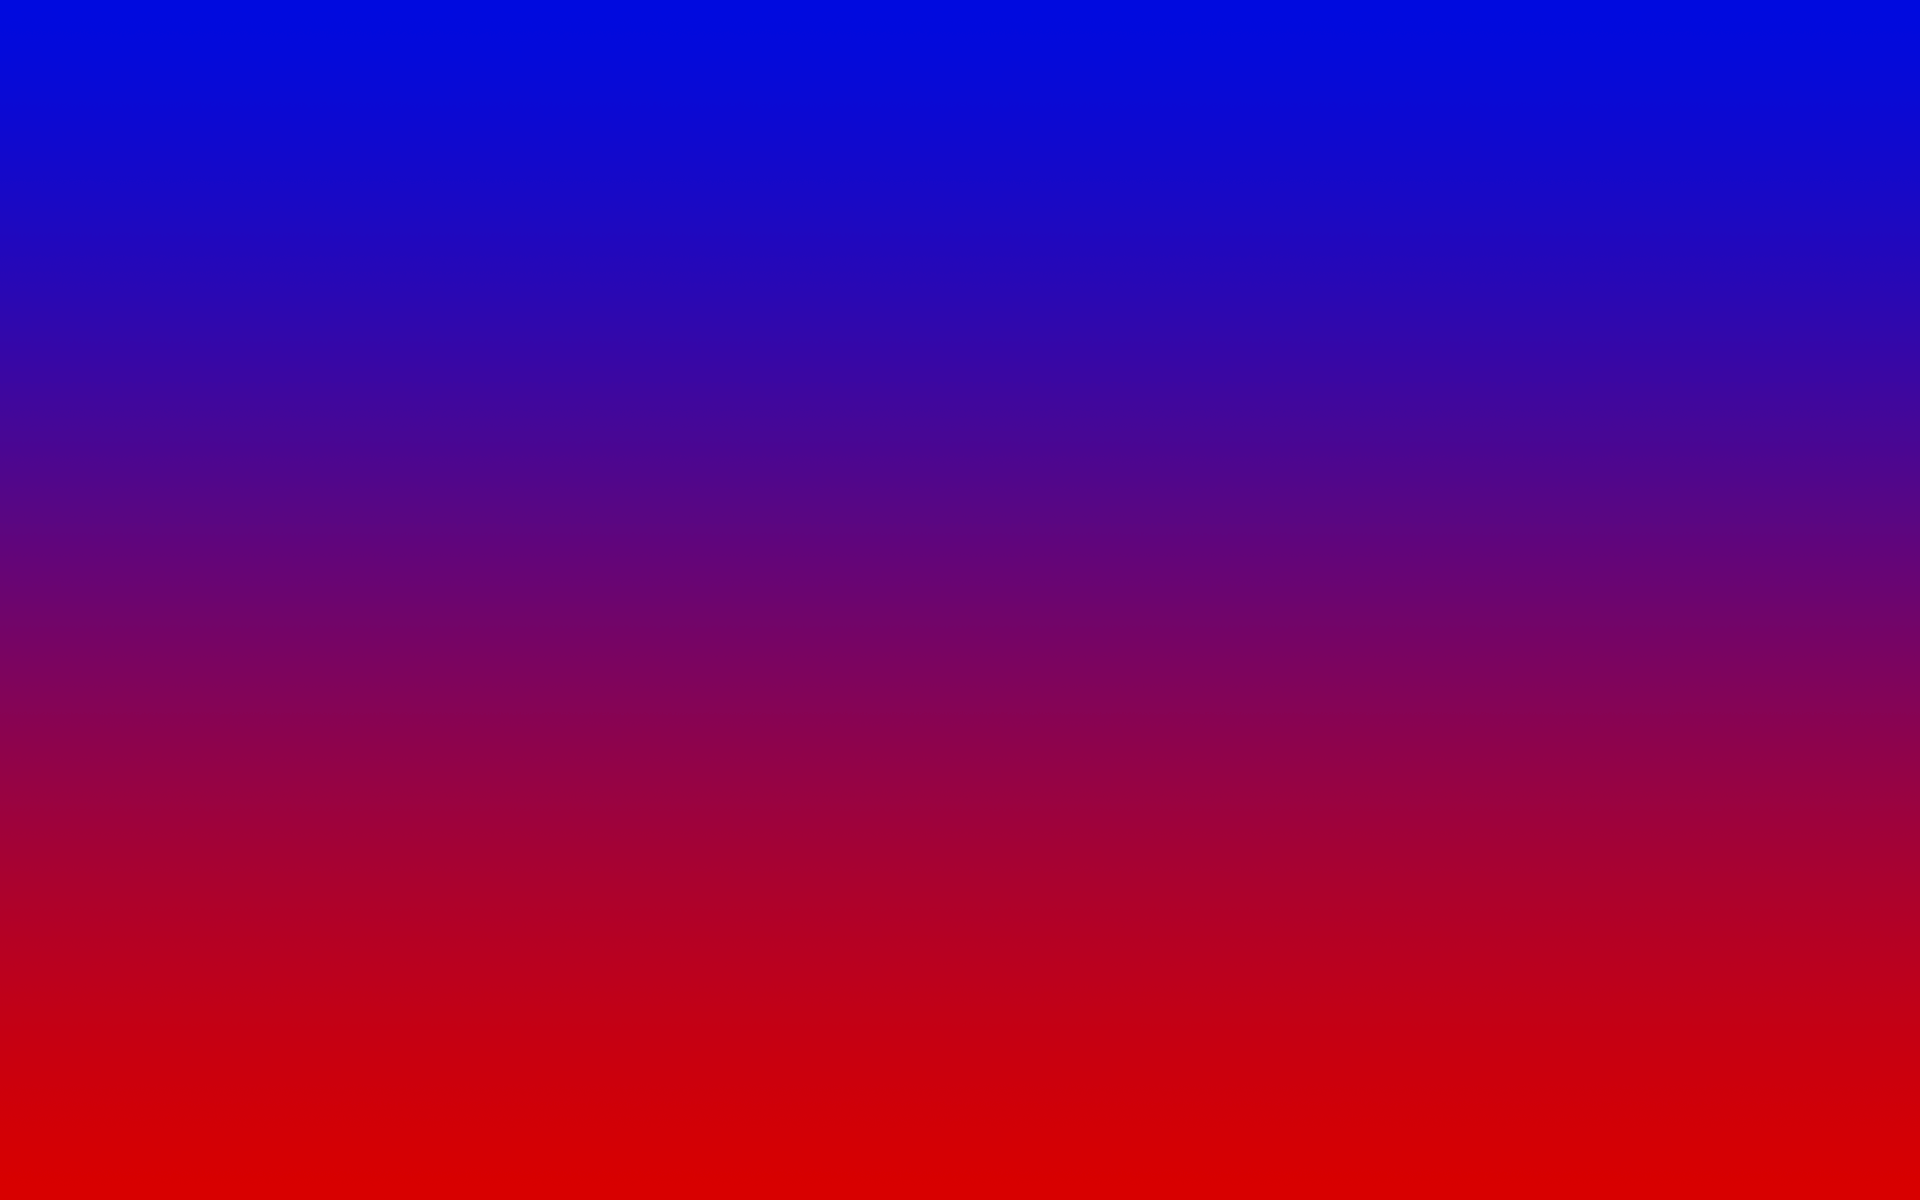 Blue And Red Gradient Wallpaper 58835 60612 Hd Wallpaper